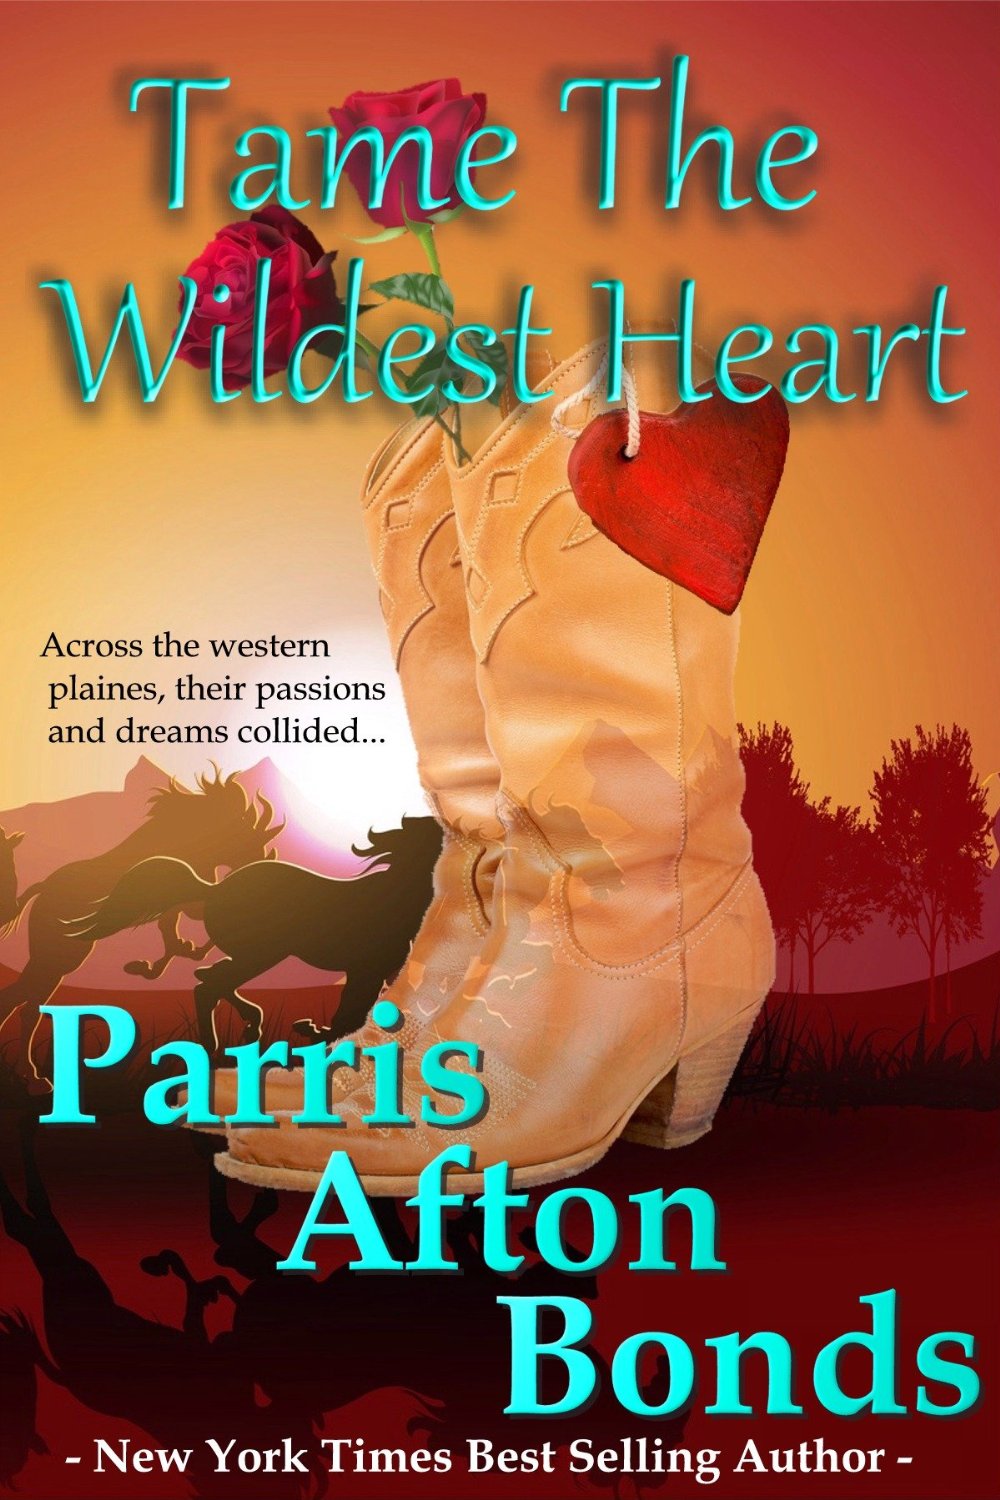 Tame the Wildest Heart by Parris Afton Bonds